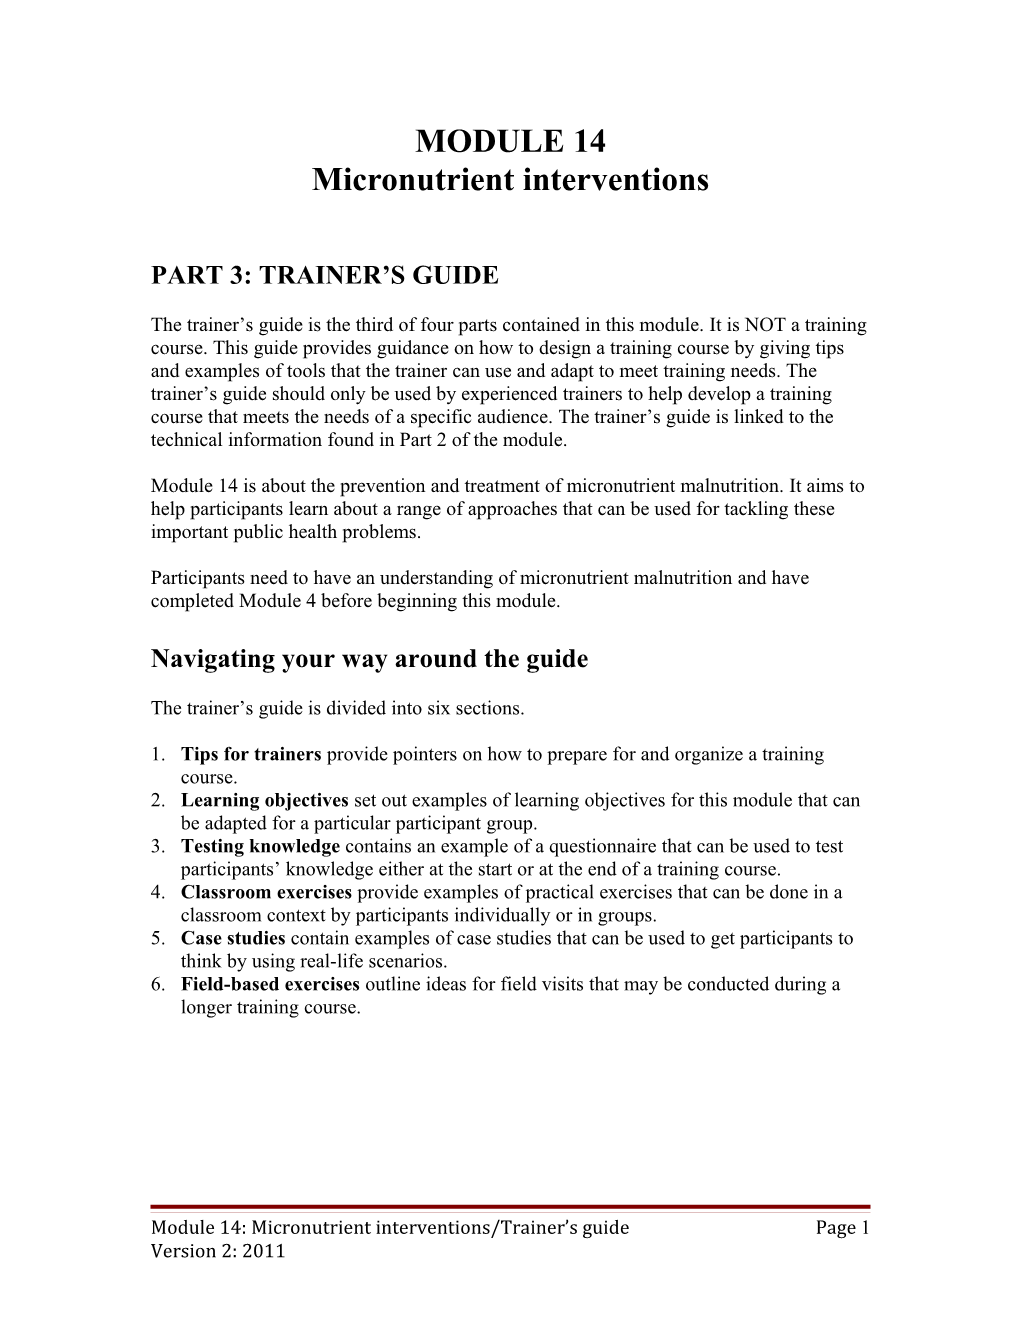 Micronutrient Interventions